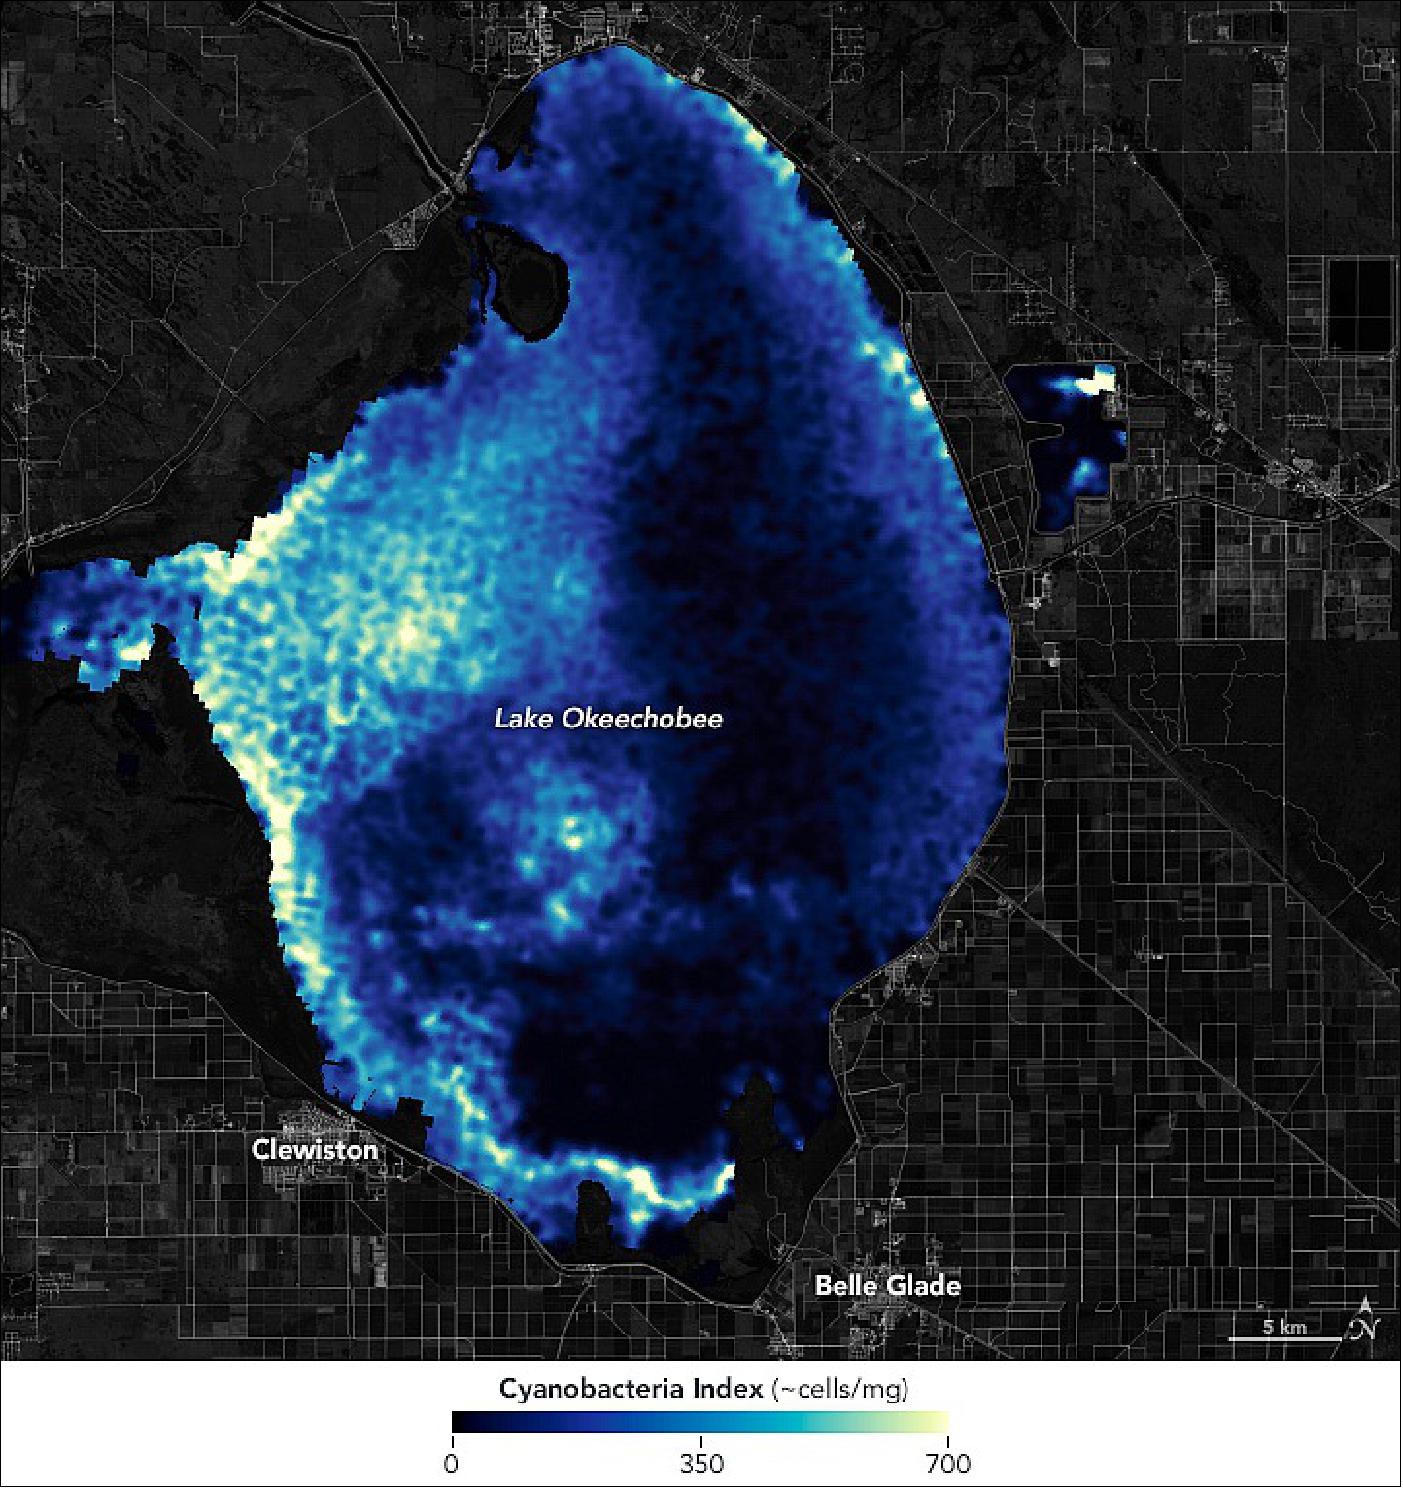 Figure 17: The map shows estimates of cyanobacteria concentrations on July 13, 2022, as reported by the CyAN (Cyanobacteria Assessment Network). The CyAN project includes contributions from NASA, the Environmental Protection Agency, the U.S. Geological Survey, and the National Oceanic and Atmospheric Administration. Instruments on the NASA/USGS Landsat satellites, the European Space Agency’s Sentinel-2 and 3 satellites, as well as several others, can detect some of the spectral signatures of algae, particularly through the fluorescent light the organisms emit in response to sunlight. Compiling and analyzing satellite images of different resolutions and wavelengths, NASA scientists produce weekly reports on the color and other properties of water across Lake Okeechobee and other water bodies in the United States (image credit: NASA Earth Observatory images by Lauren Dauphin, using Landsat data from the U.S. Geological Survey and cyanobacteria data from the Cyanobacteria Assessment Network (CyAN). Story by Michael Carlowicz)